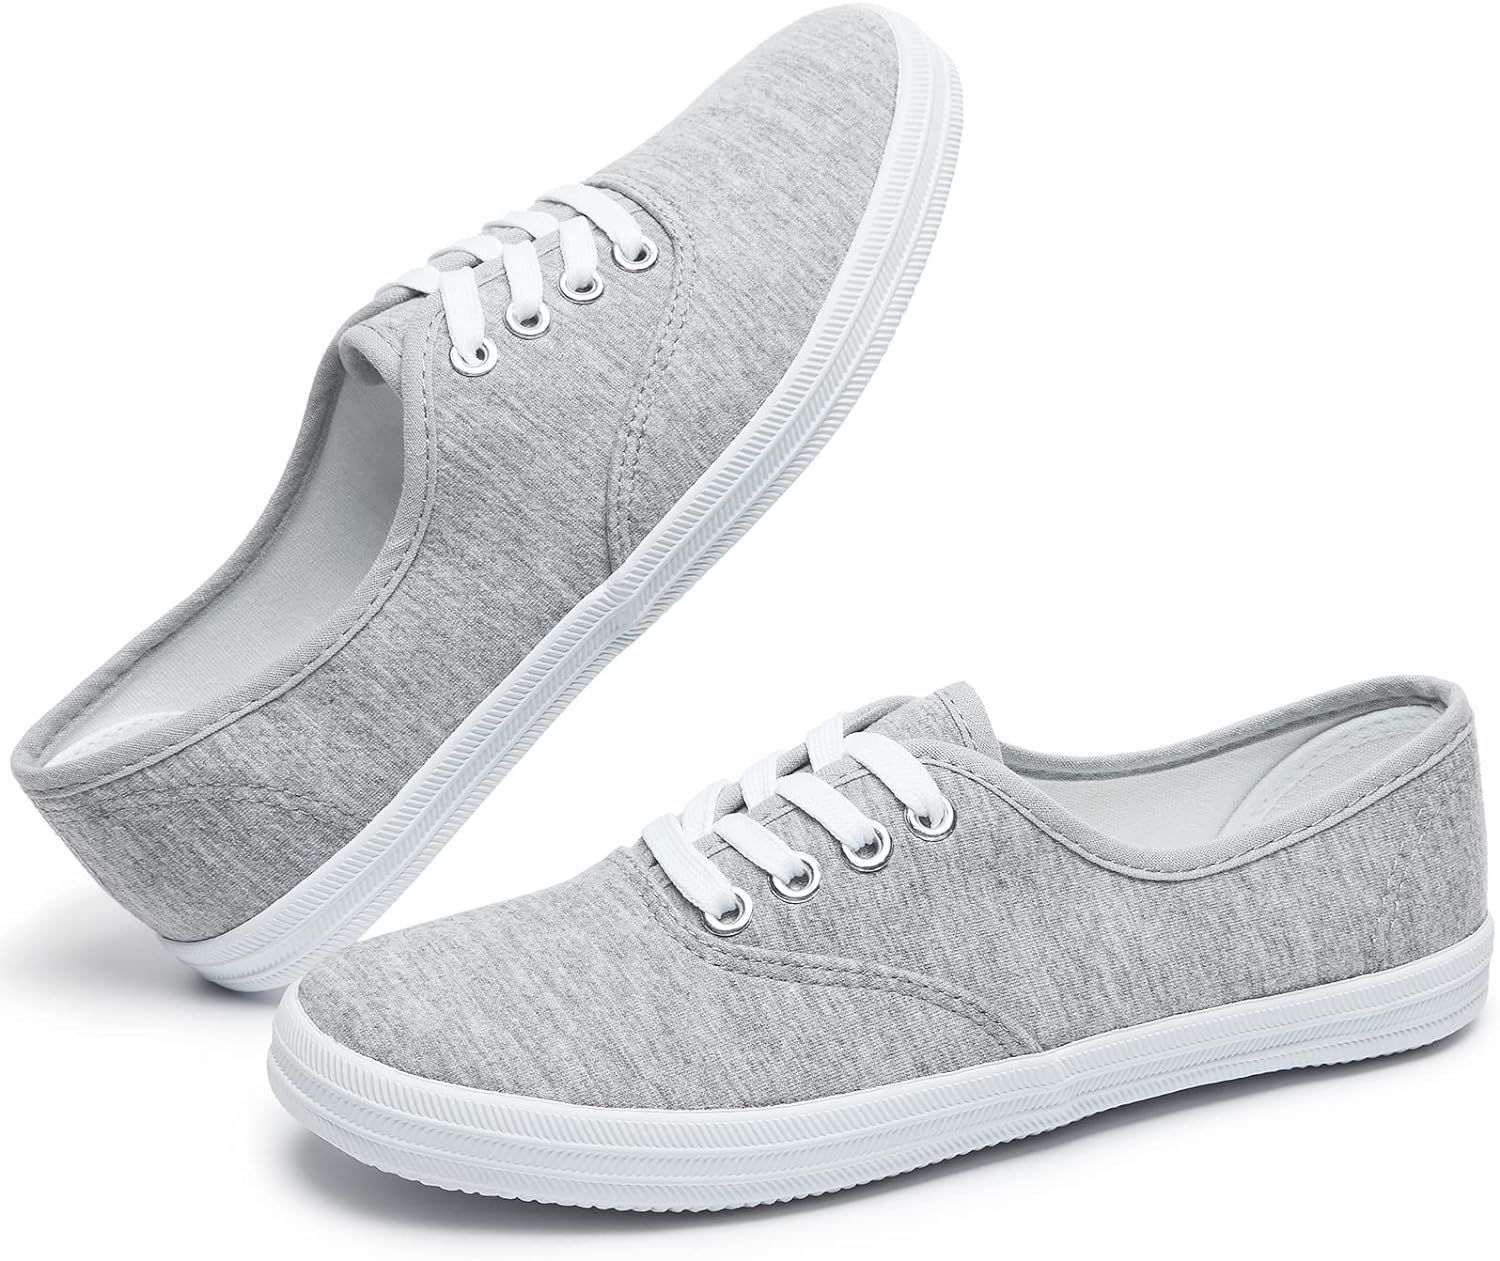 TUOPIN Womens White Canvas Sneakers Low Top Lace-up Canvas Shoes Lightweight Casual Tennis Shoes